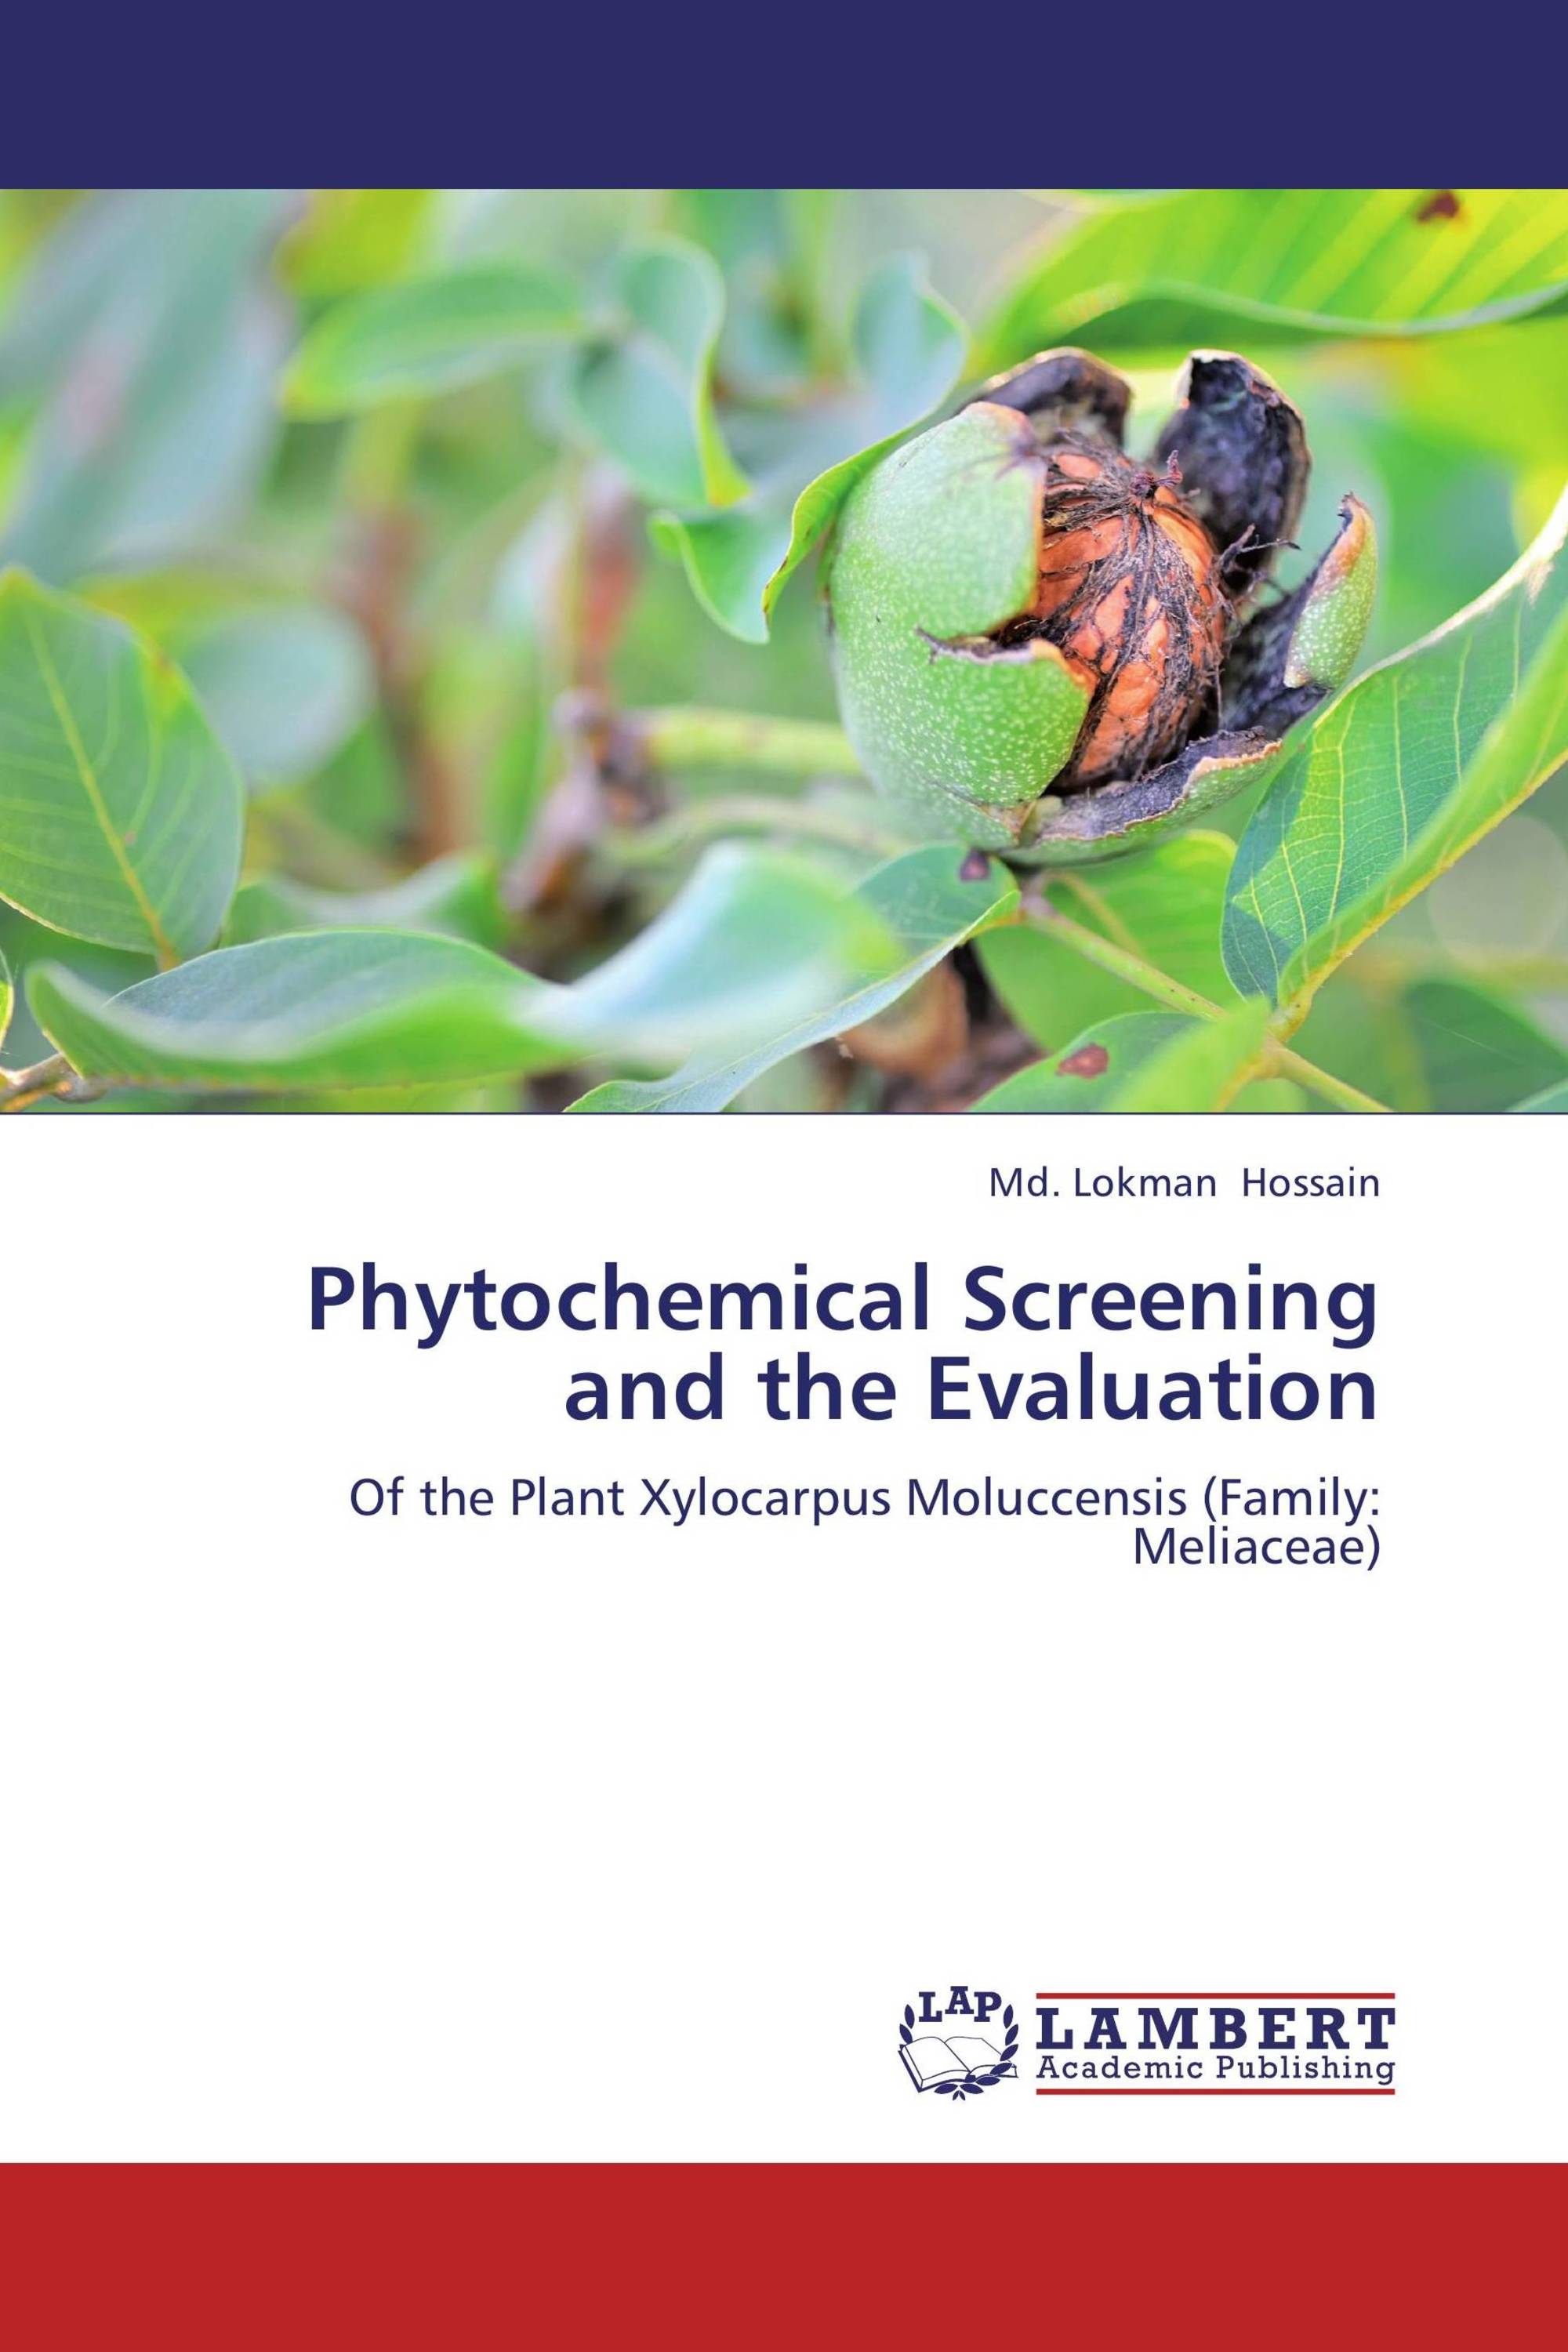 literature review on phytochemicals pdf